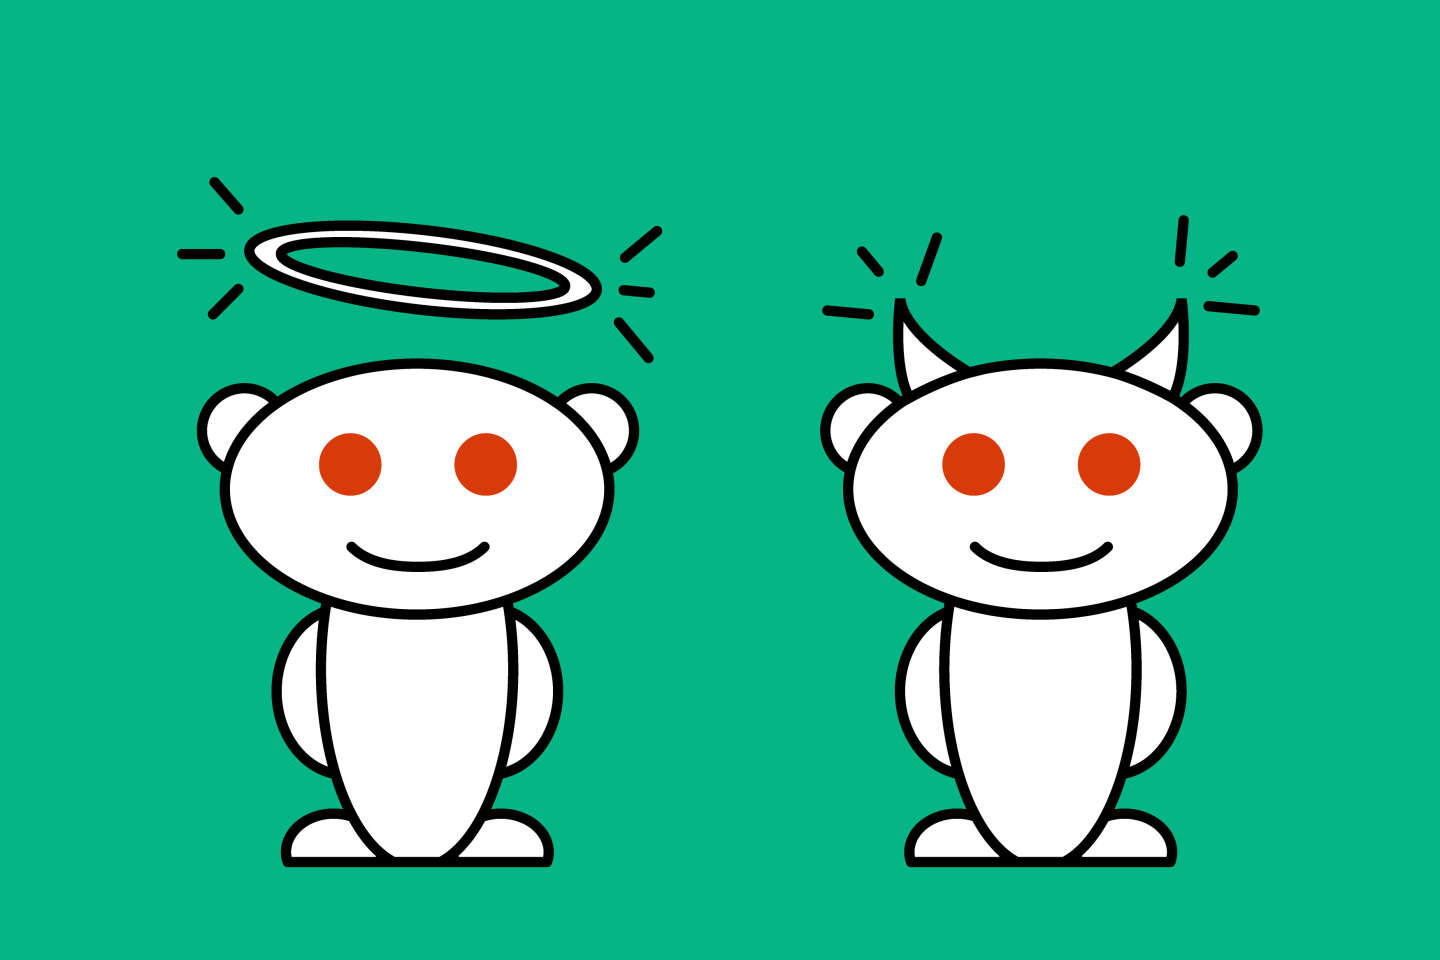 Reddit will now pay certain contributors